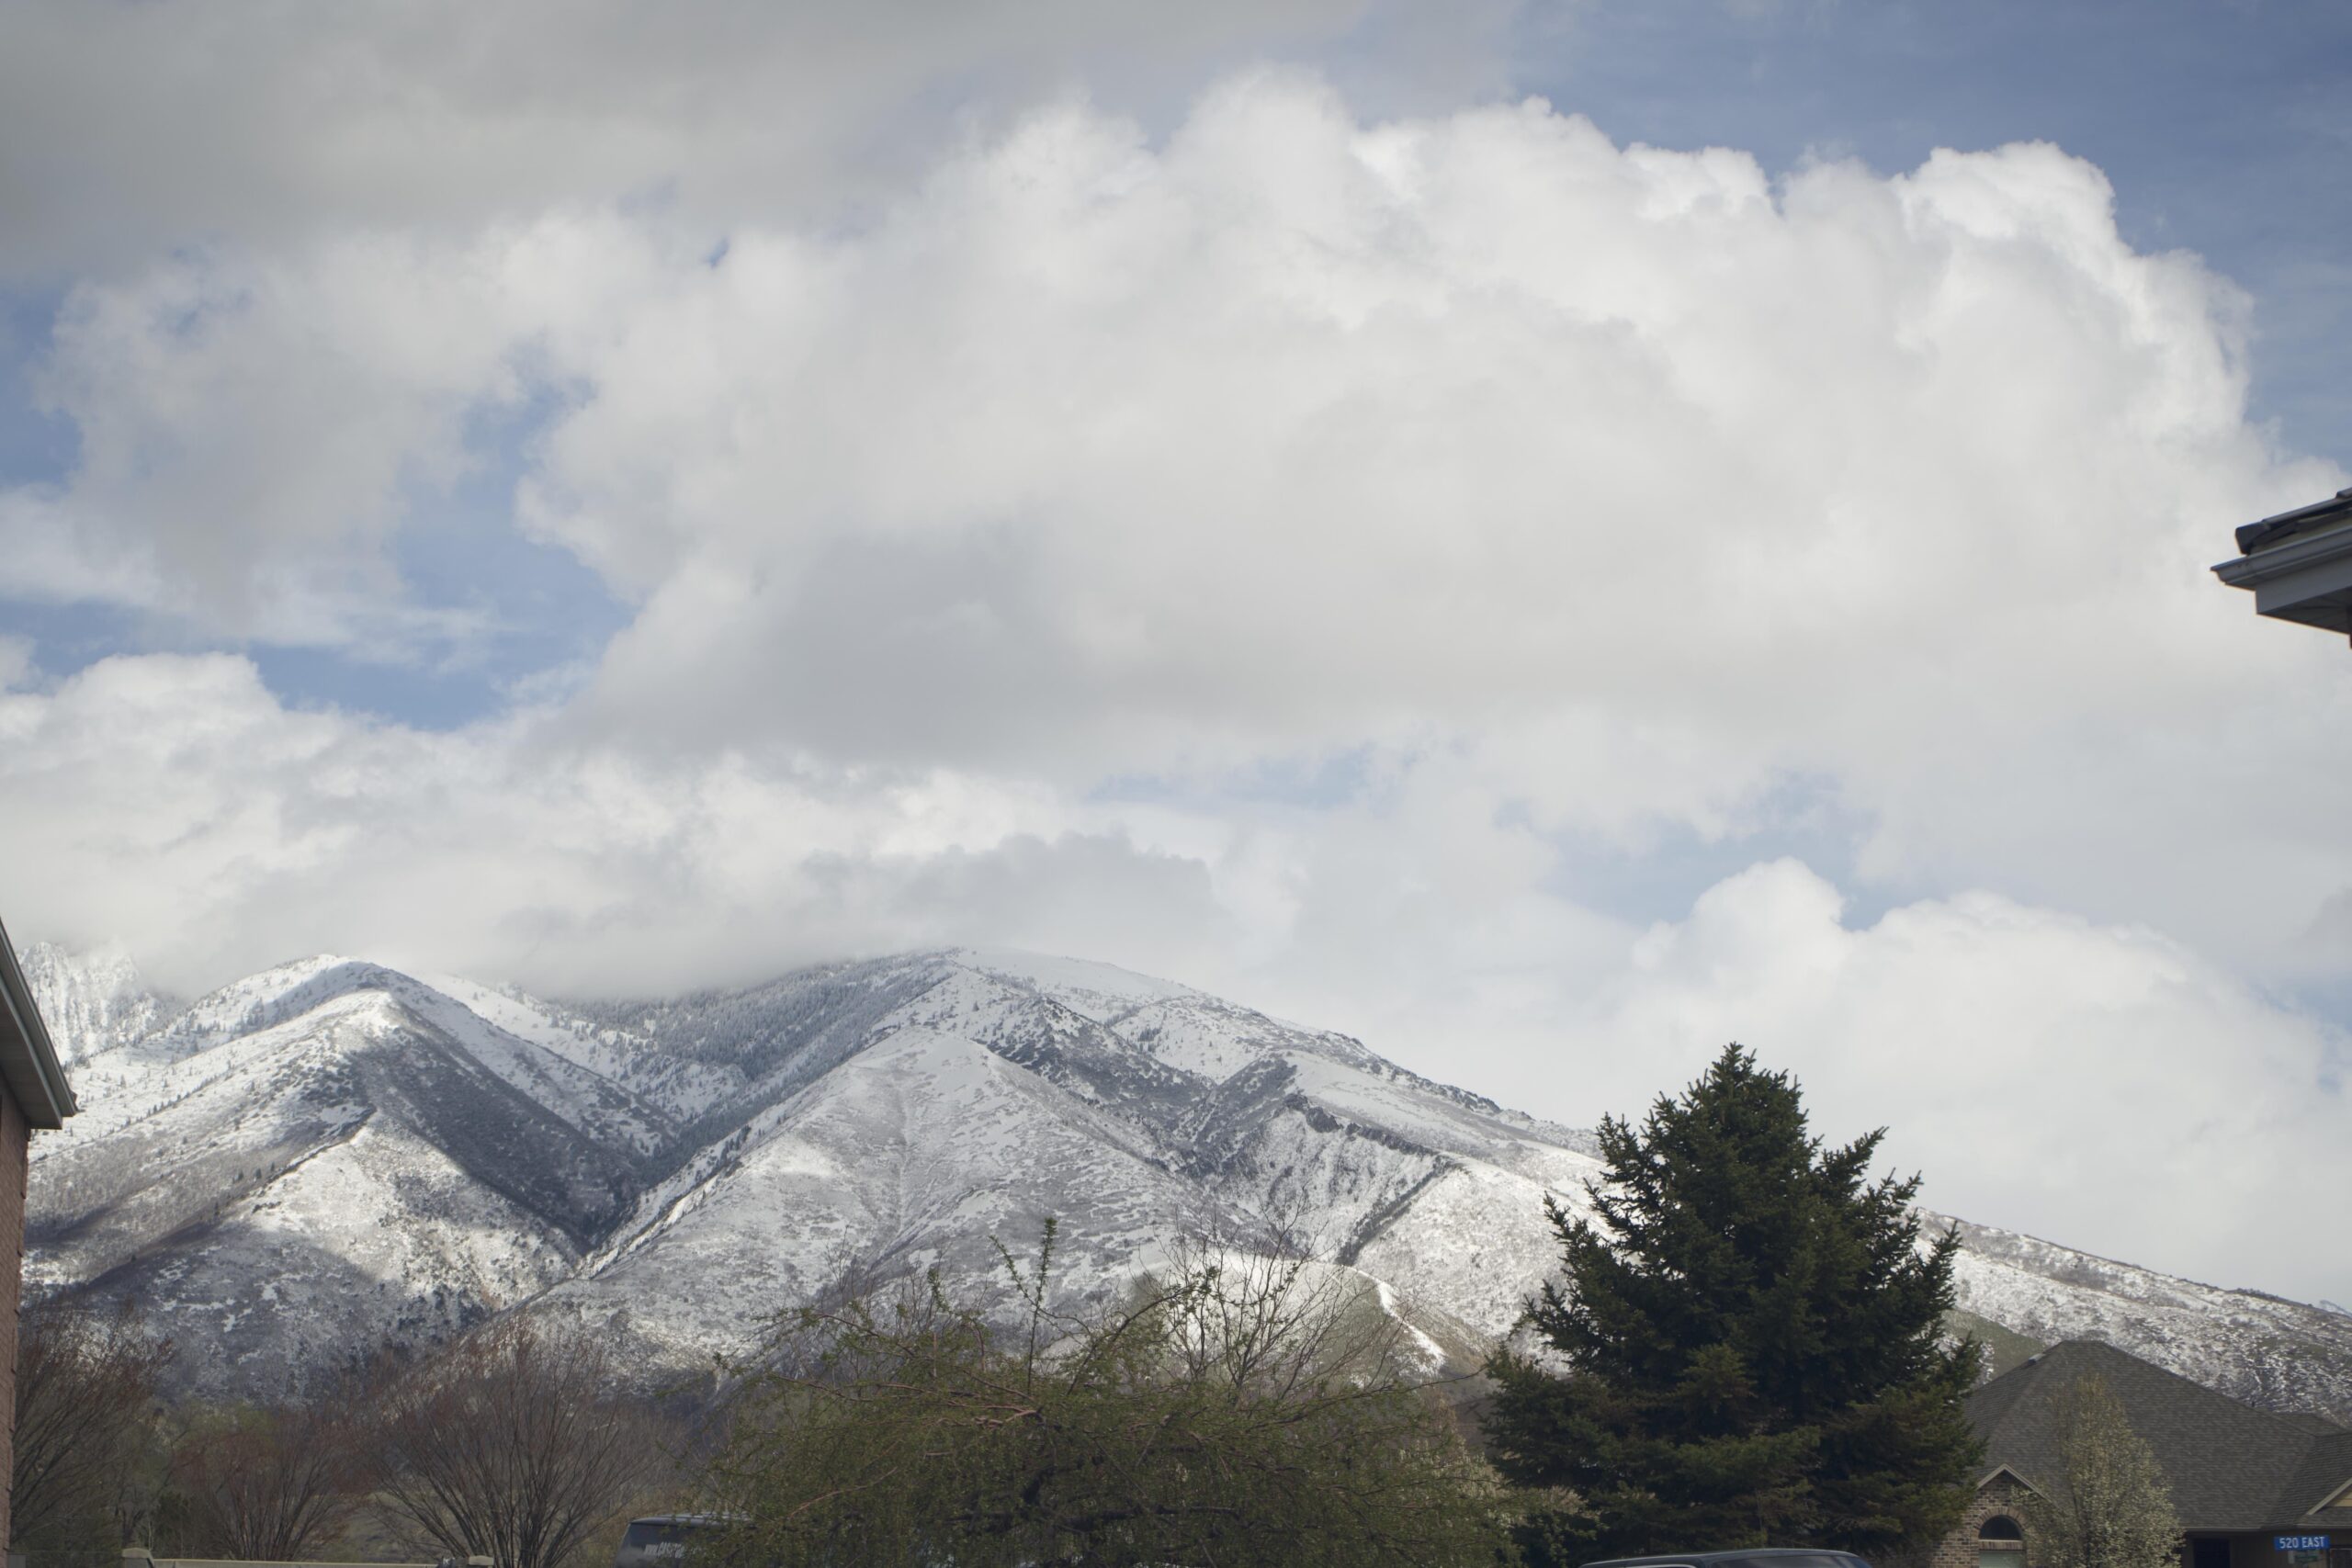 Draper mountain views from Unified Family Therapy office.